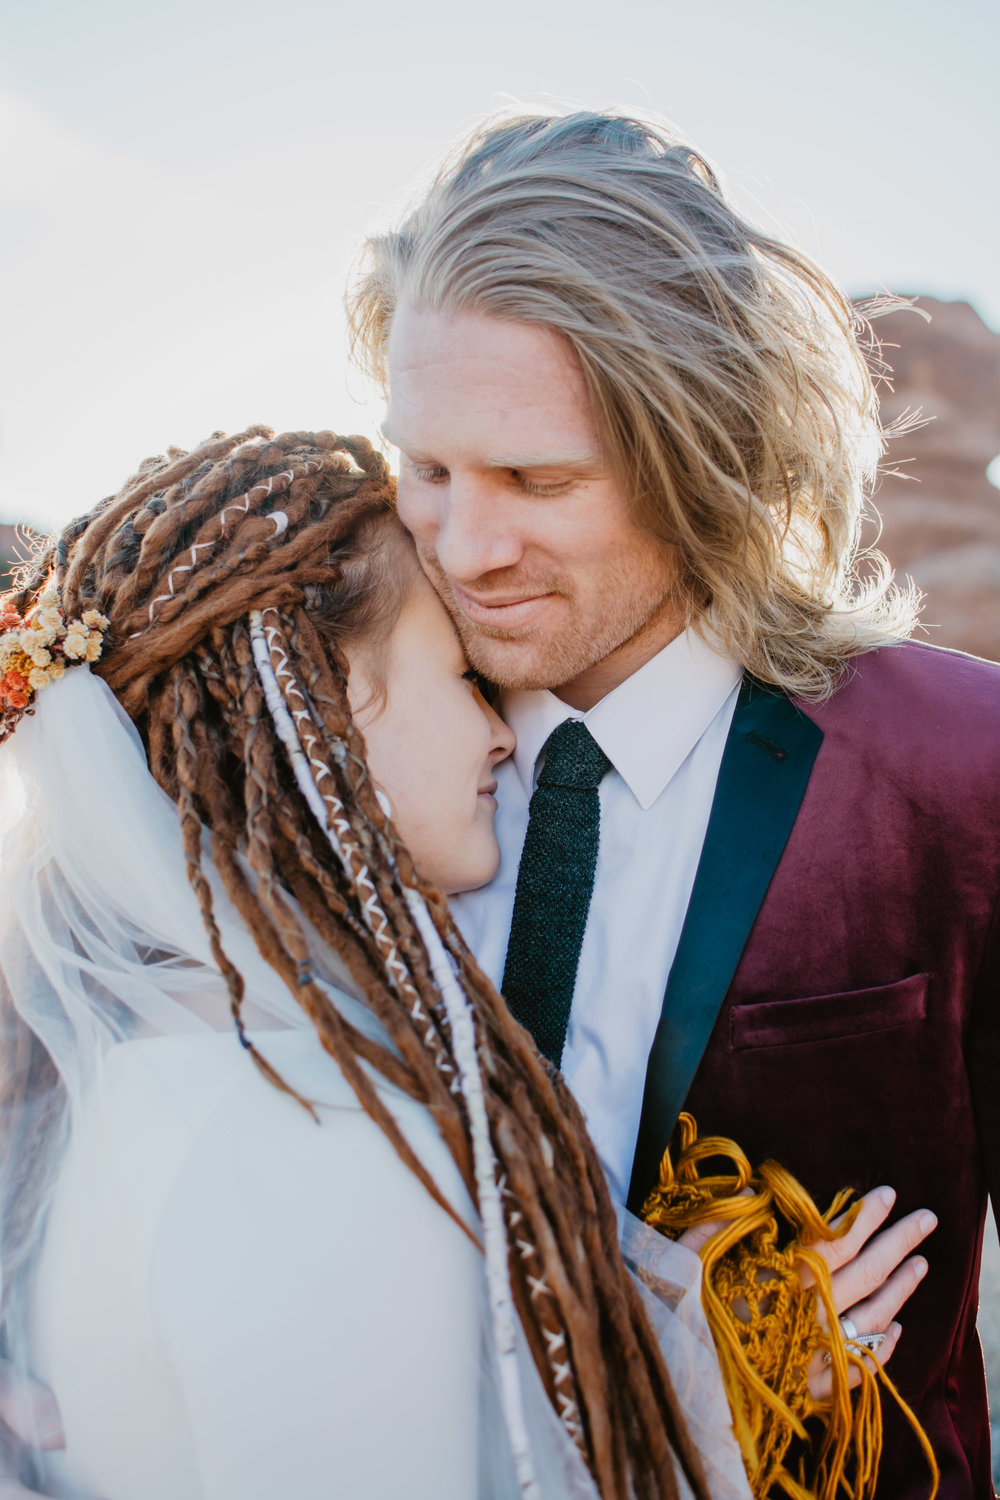 red headed bride who has dreads snuggles into her blonde grooms chest as he smiles down at her on their wedding day for their bridals Jocilyn Bennett Photography | How to Plan an Elopement | Why Elope | Reasons to Elope | Destination Wedding Photographer | Utah Wedding Photographer | Adventure Photographer | Destination Elopement Photographer | Traveling Photographer | Arches National Park | Arches National Park Elopement | Southern Utah Elopement | Boho Bride | Bride with dreads |